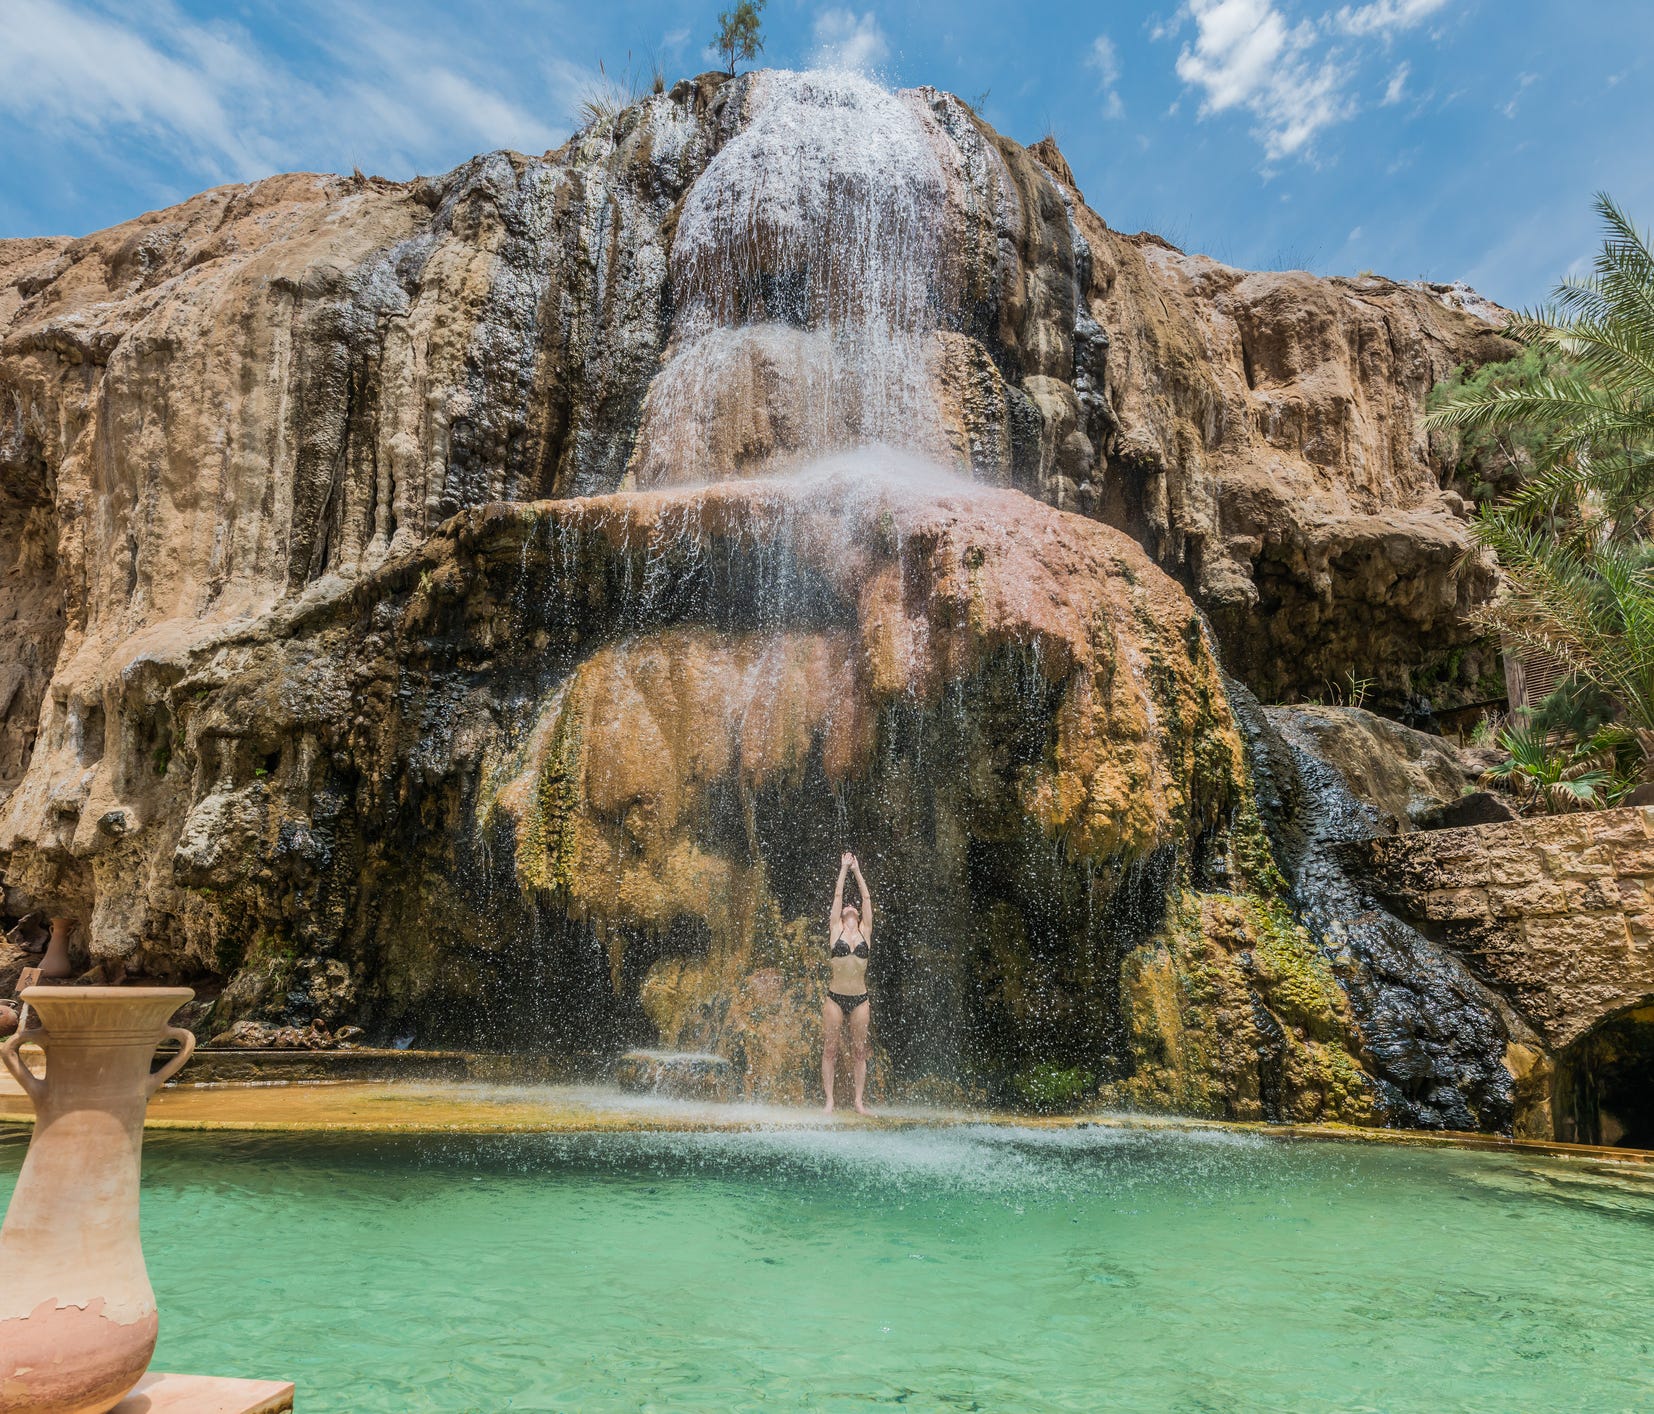 Discover your own desert oasis—complete with steaming waterfalls and hot spring pools—located near the Dead Sea at Ma'in Hot Springs in Jordan.